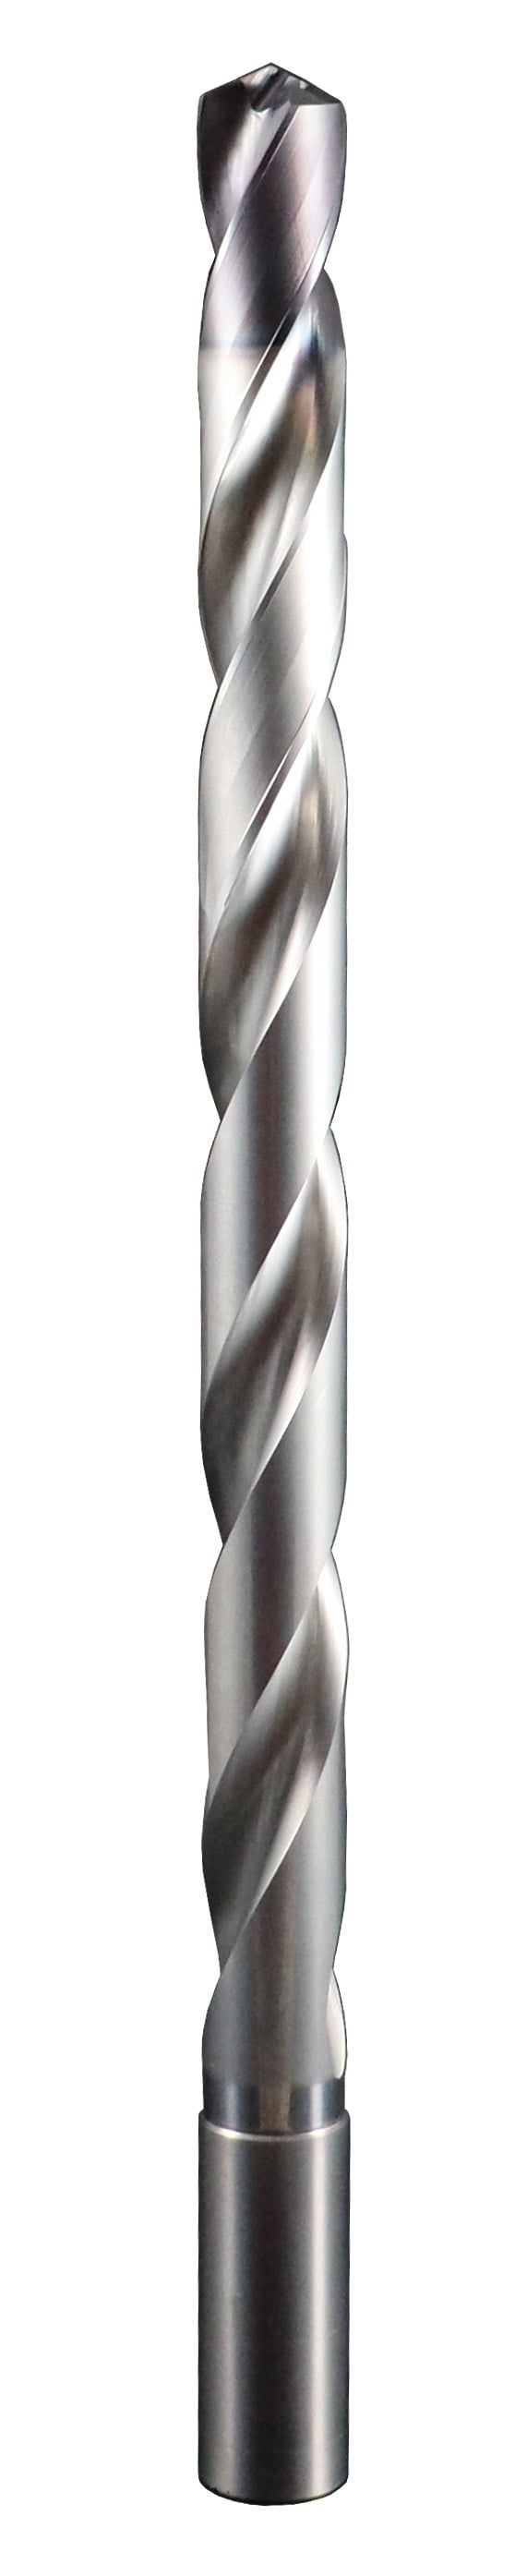 3.30mm Dia, 137 Degree Point, Solid Carbide Drill - 66712